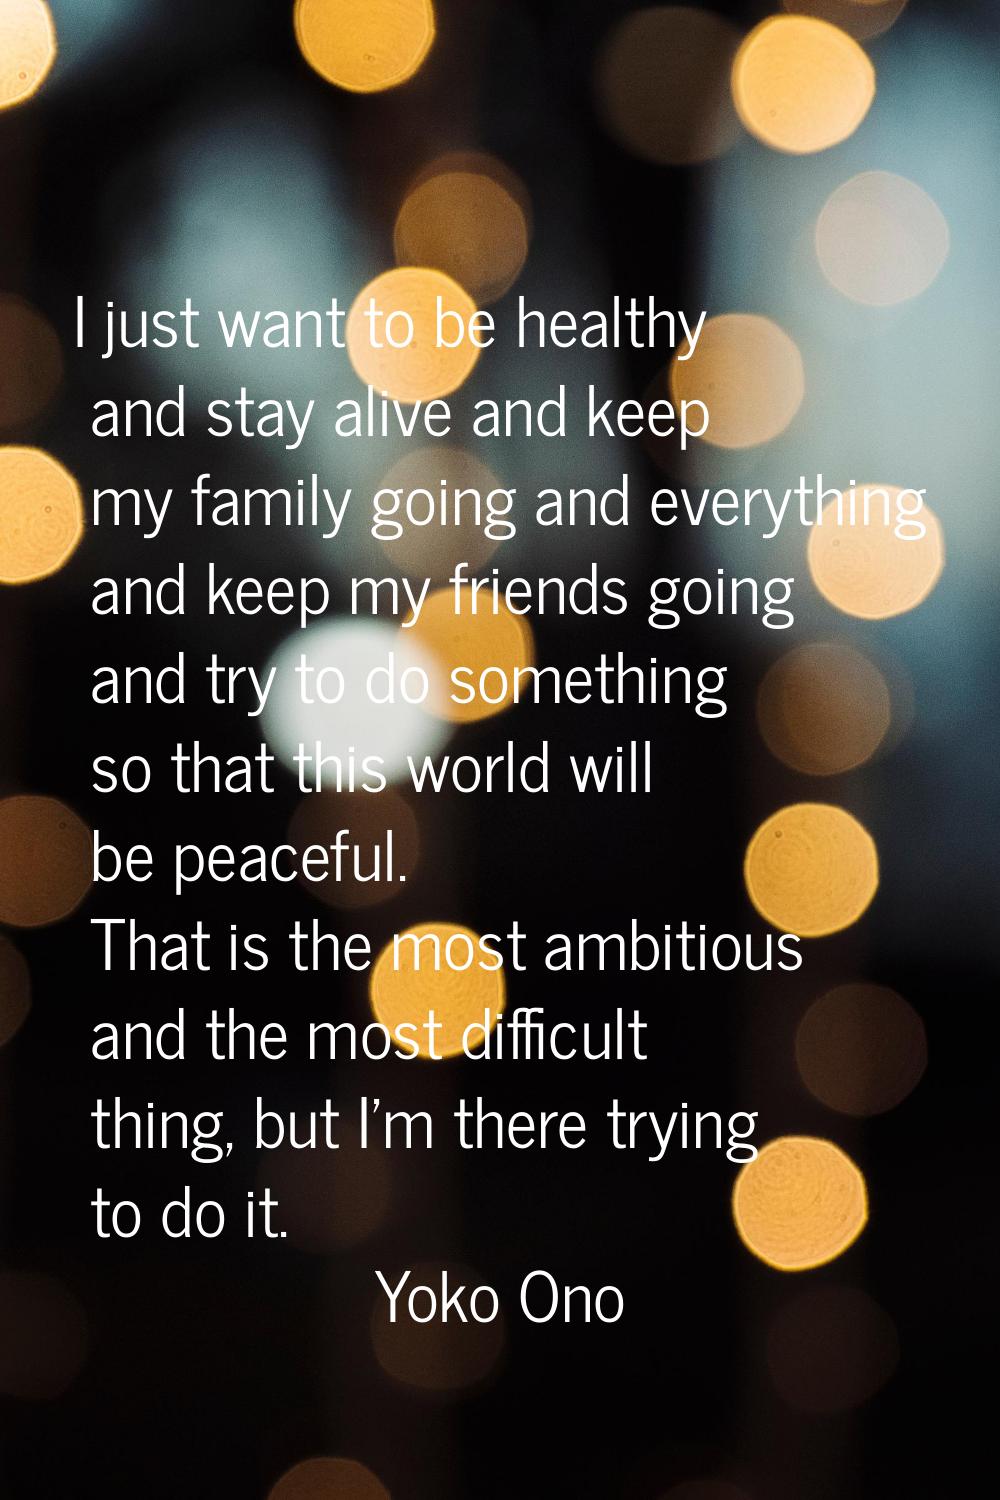 I just want to be healthy and stay alive and keep my family going and everything and keep my friend